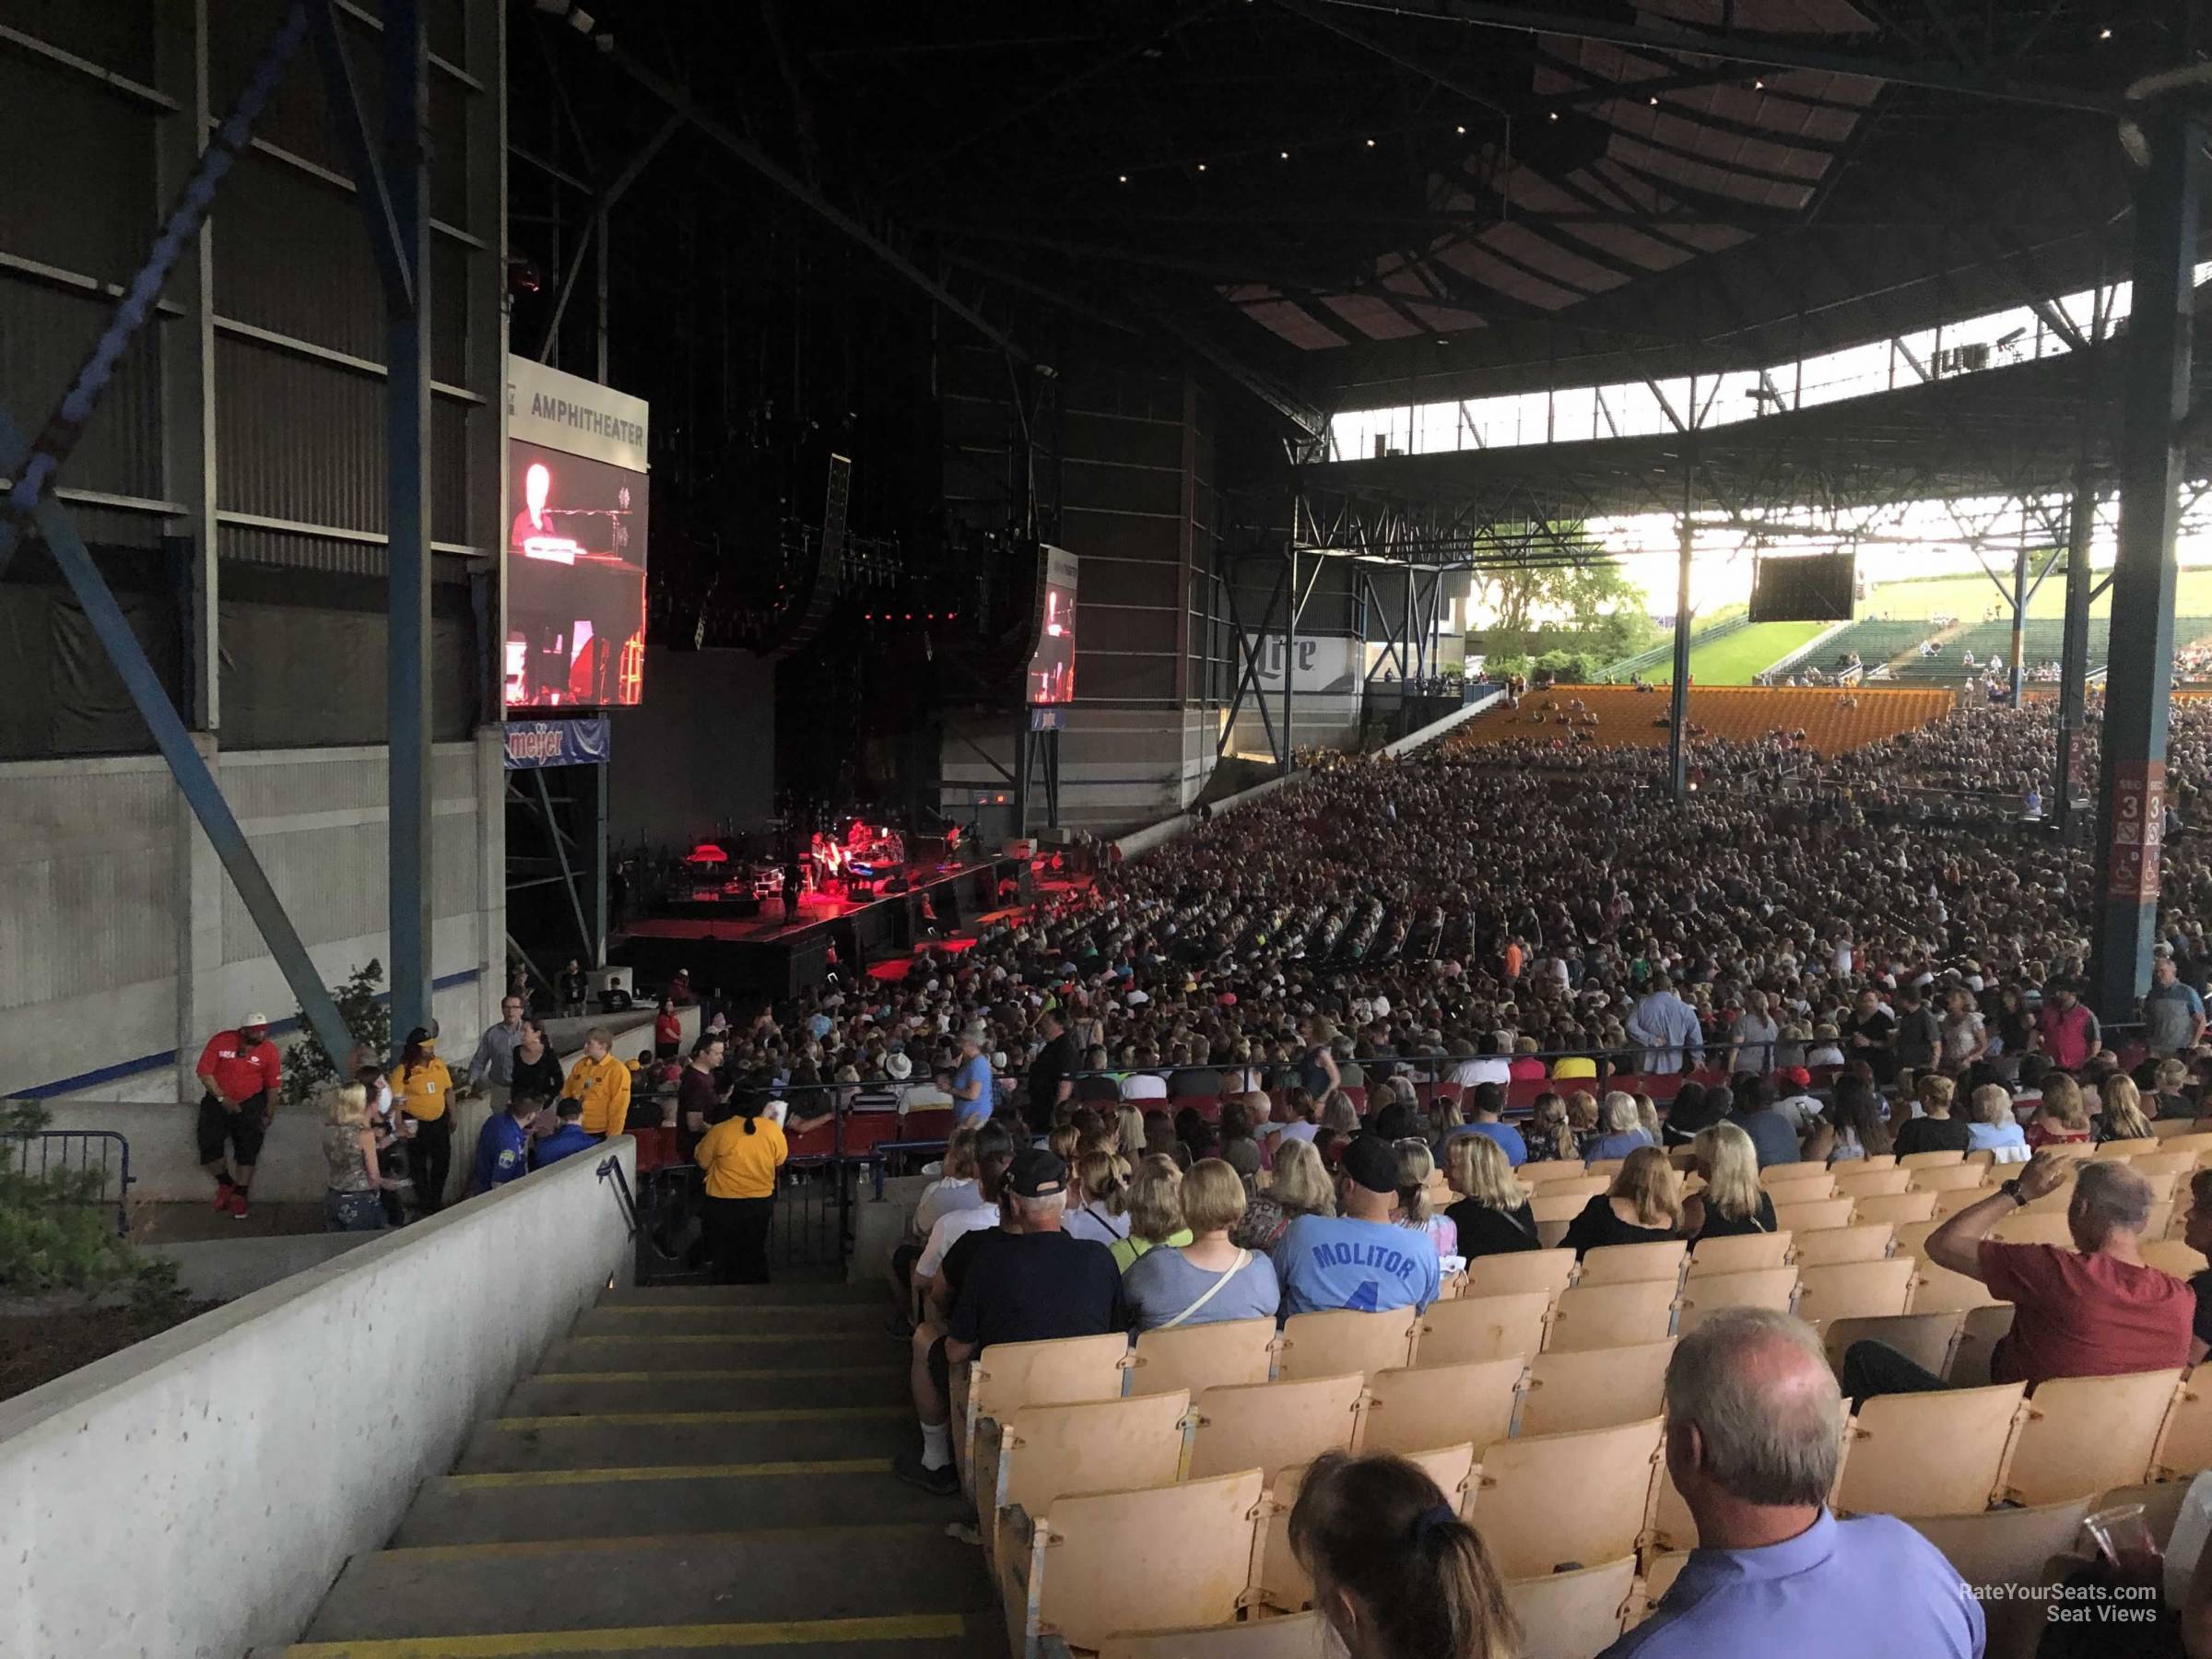 section 210, row j seat view  - american family insurance amphitheater